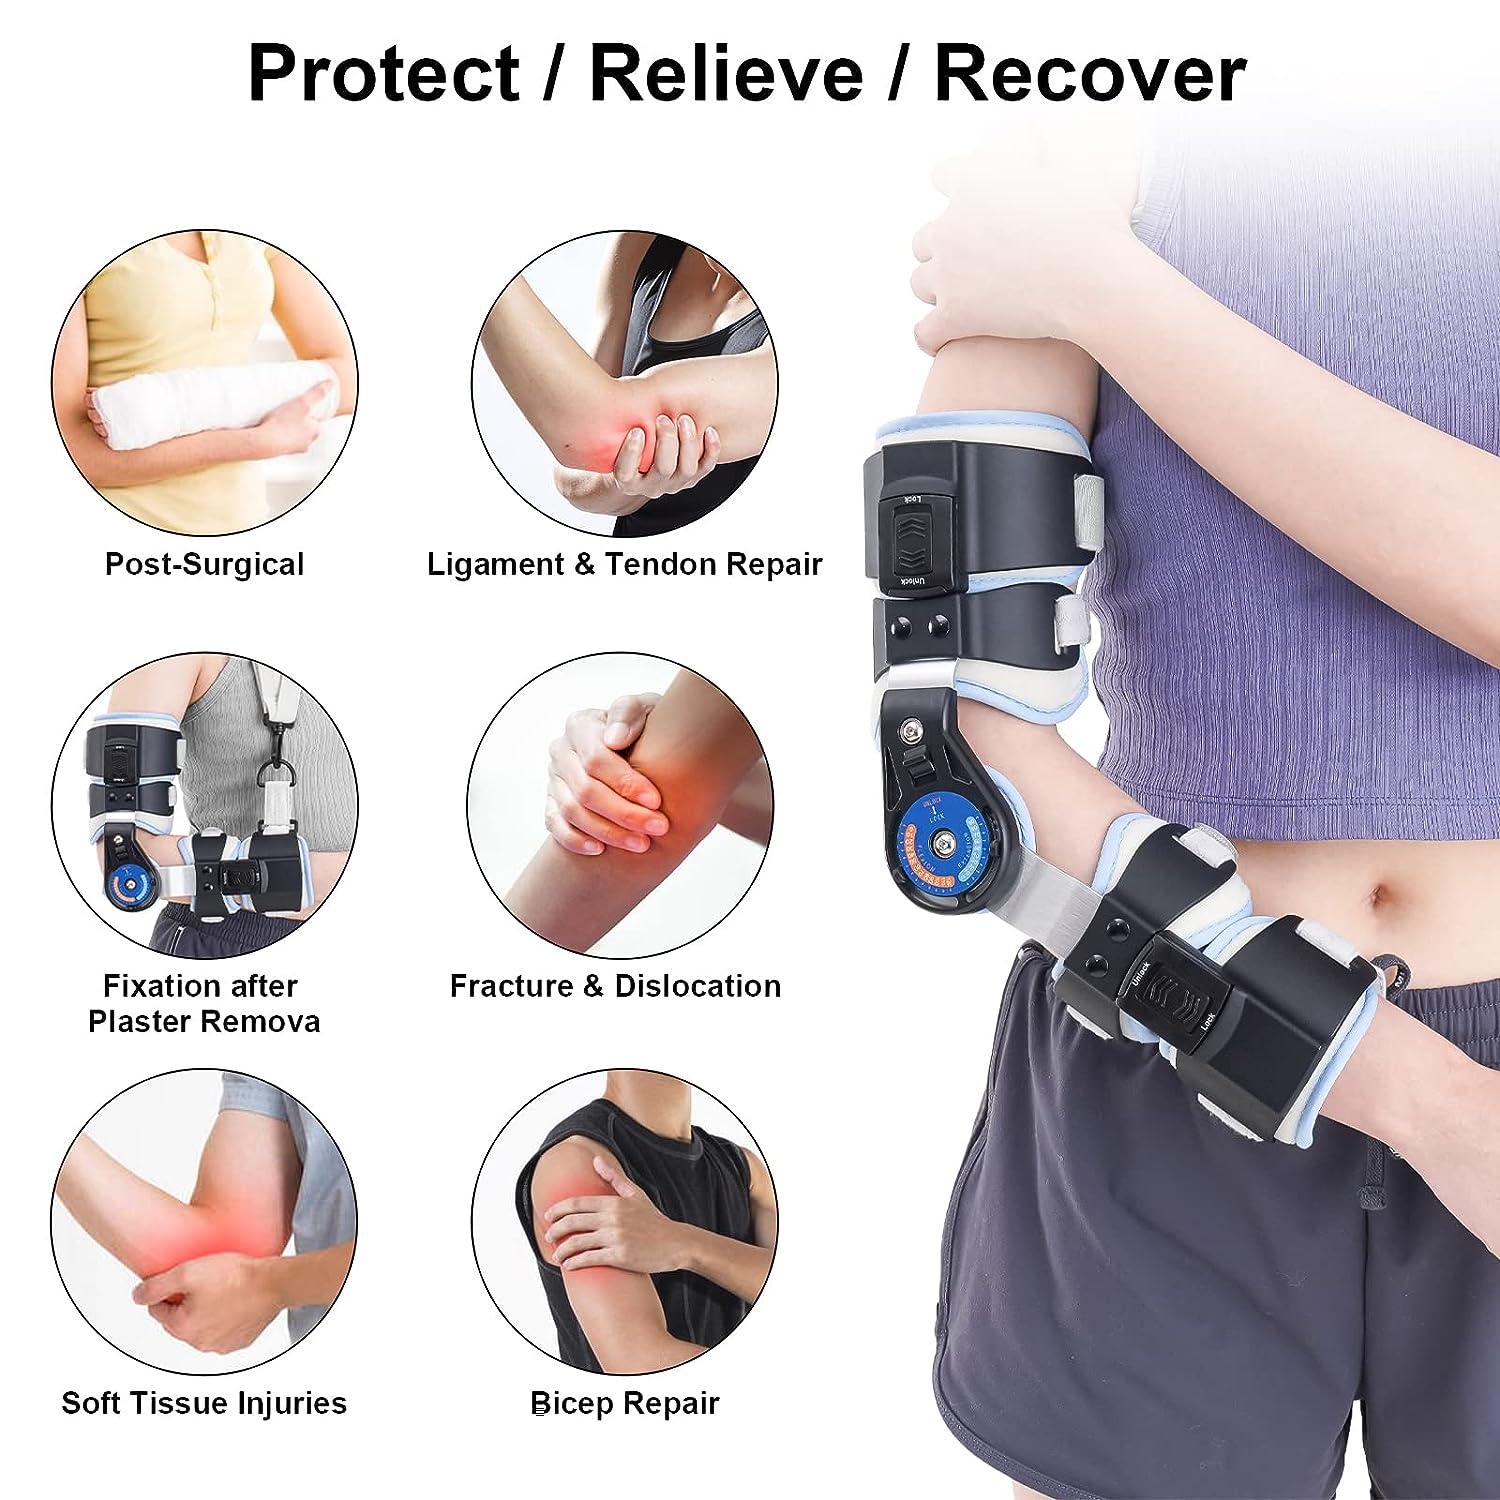 RISURRY Hinged Elbow Brace Adjustable Post OP Elbow Brace with Shoulder  Sling Stabilizer Splint Arm Injury Recovery Support After Surgery (Right Arm)  Universal-Right